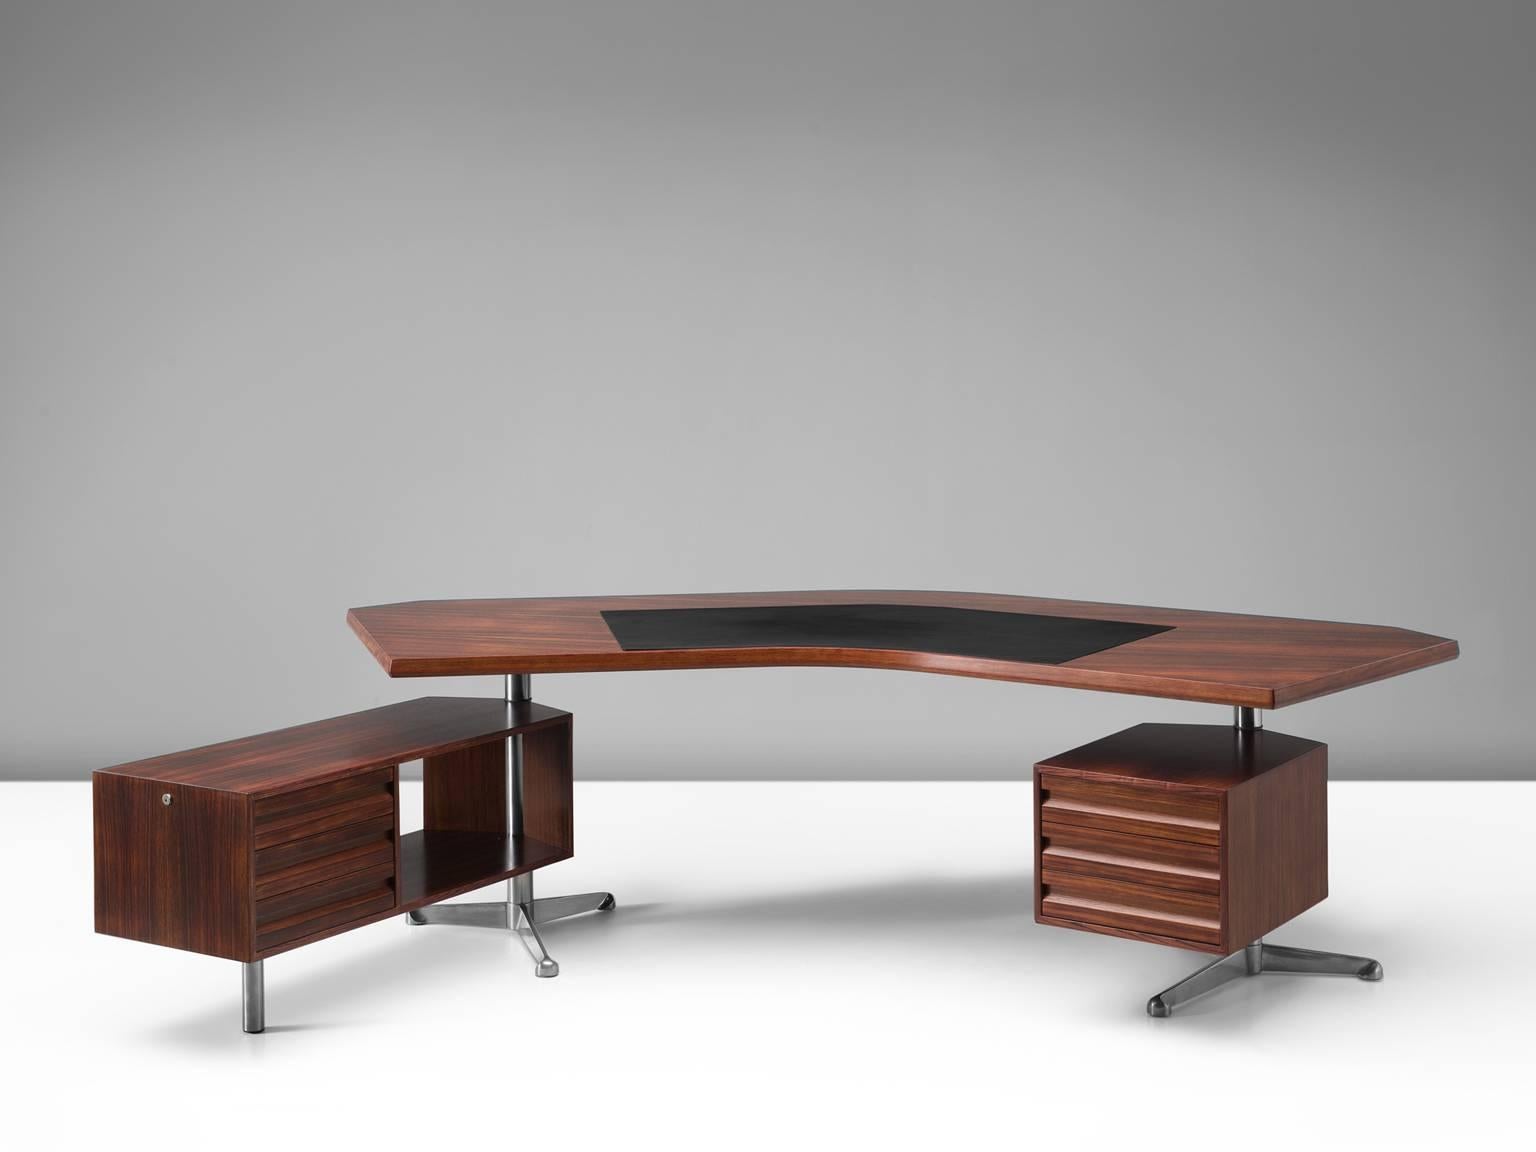 Desk T-96 'Boomerang', in rosewood and metal, by Osvaldo Borsani for Tecno, Italy, 1956. 

This version Boomerang desk by Osvaldo Borsani is executed in rosewood and includes a new black leather writing pad. The two revolving cabinets are held in